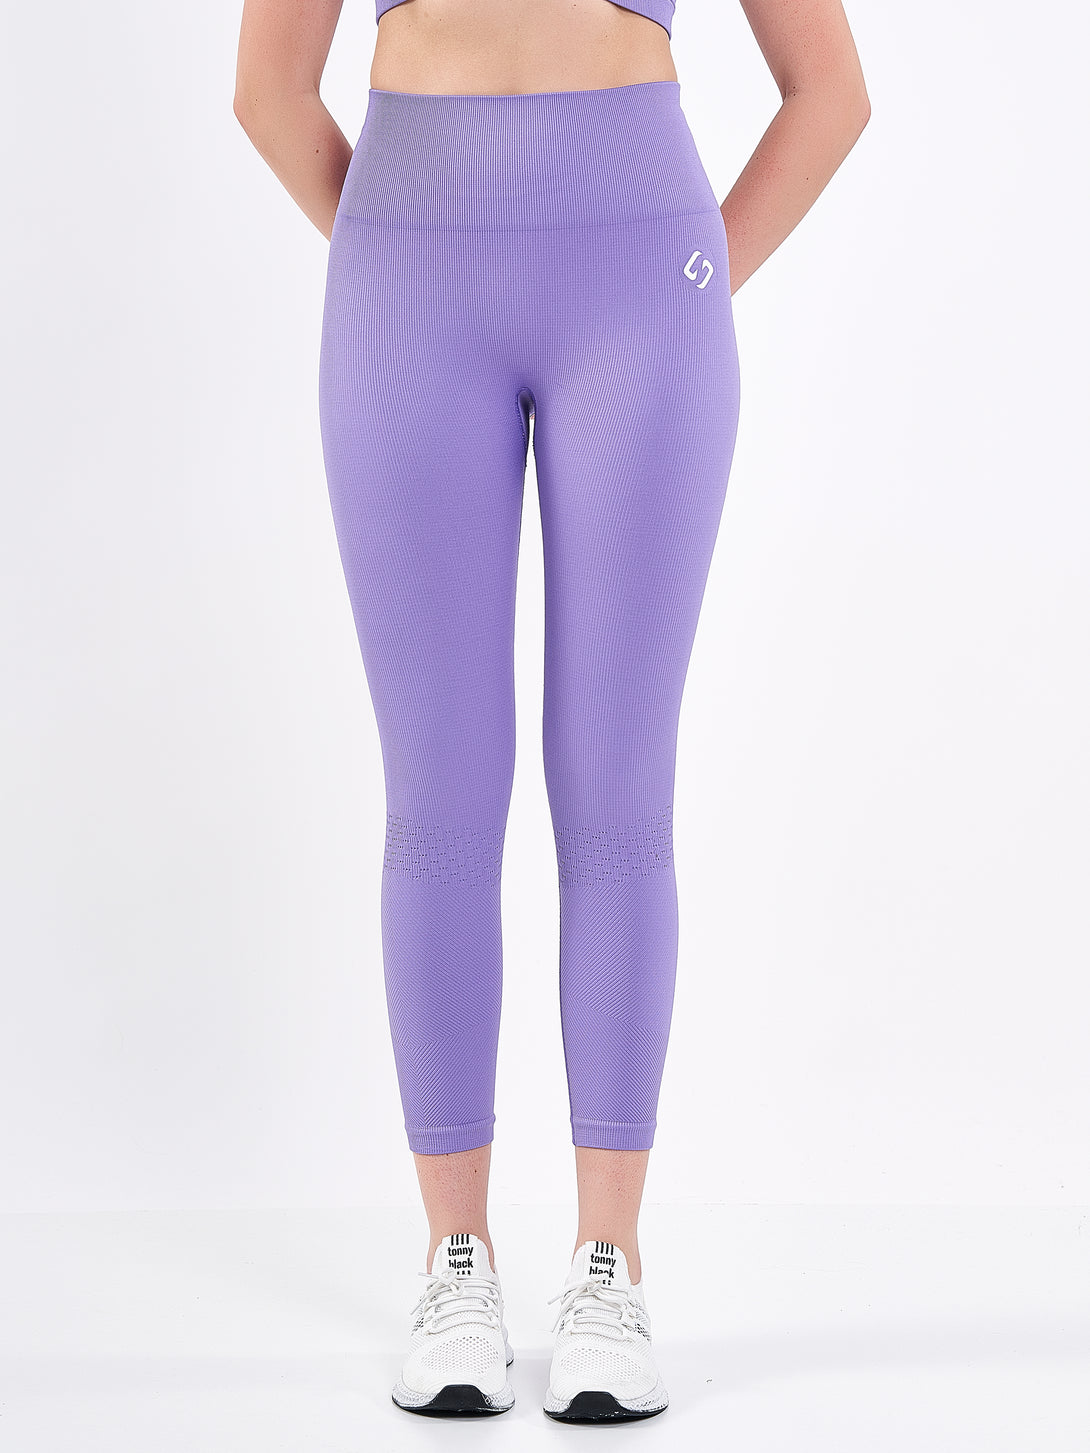 A Woman Wearing Paisley Purple Color Seamless High-Waist Ankle-Length Ribbed Leggings. Super-Soft